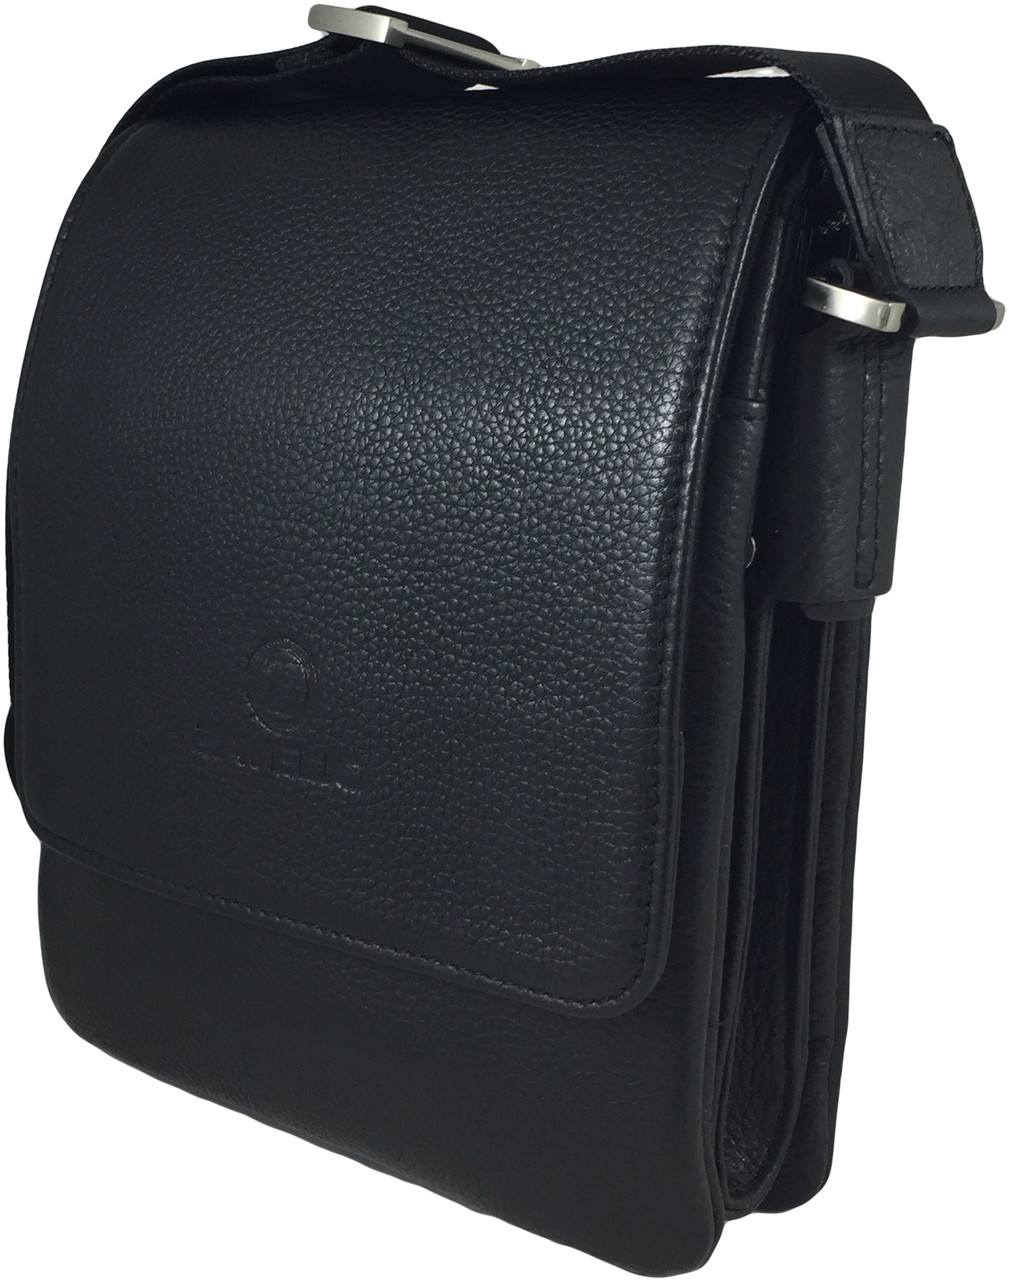 Genuine Leather Small Crossbody Bags for Male Black Replicas Bags